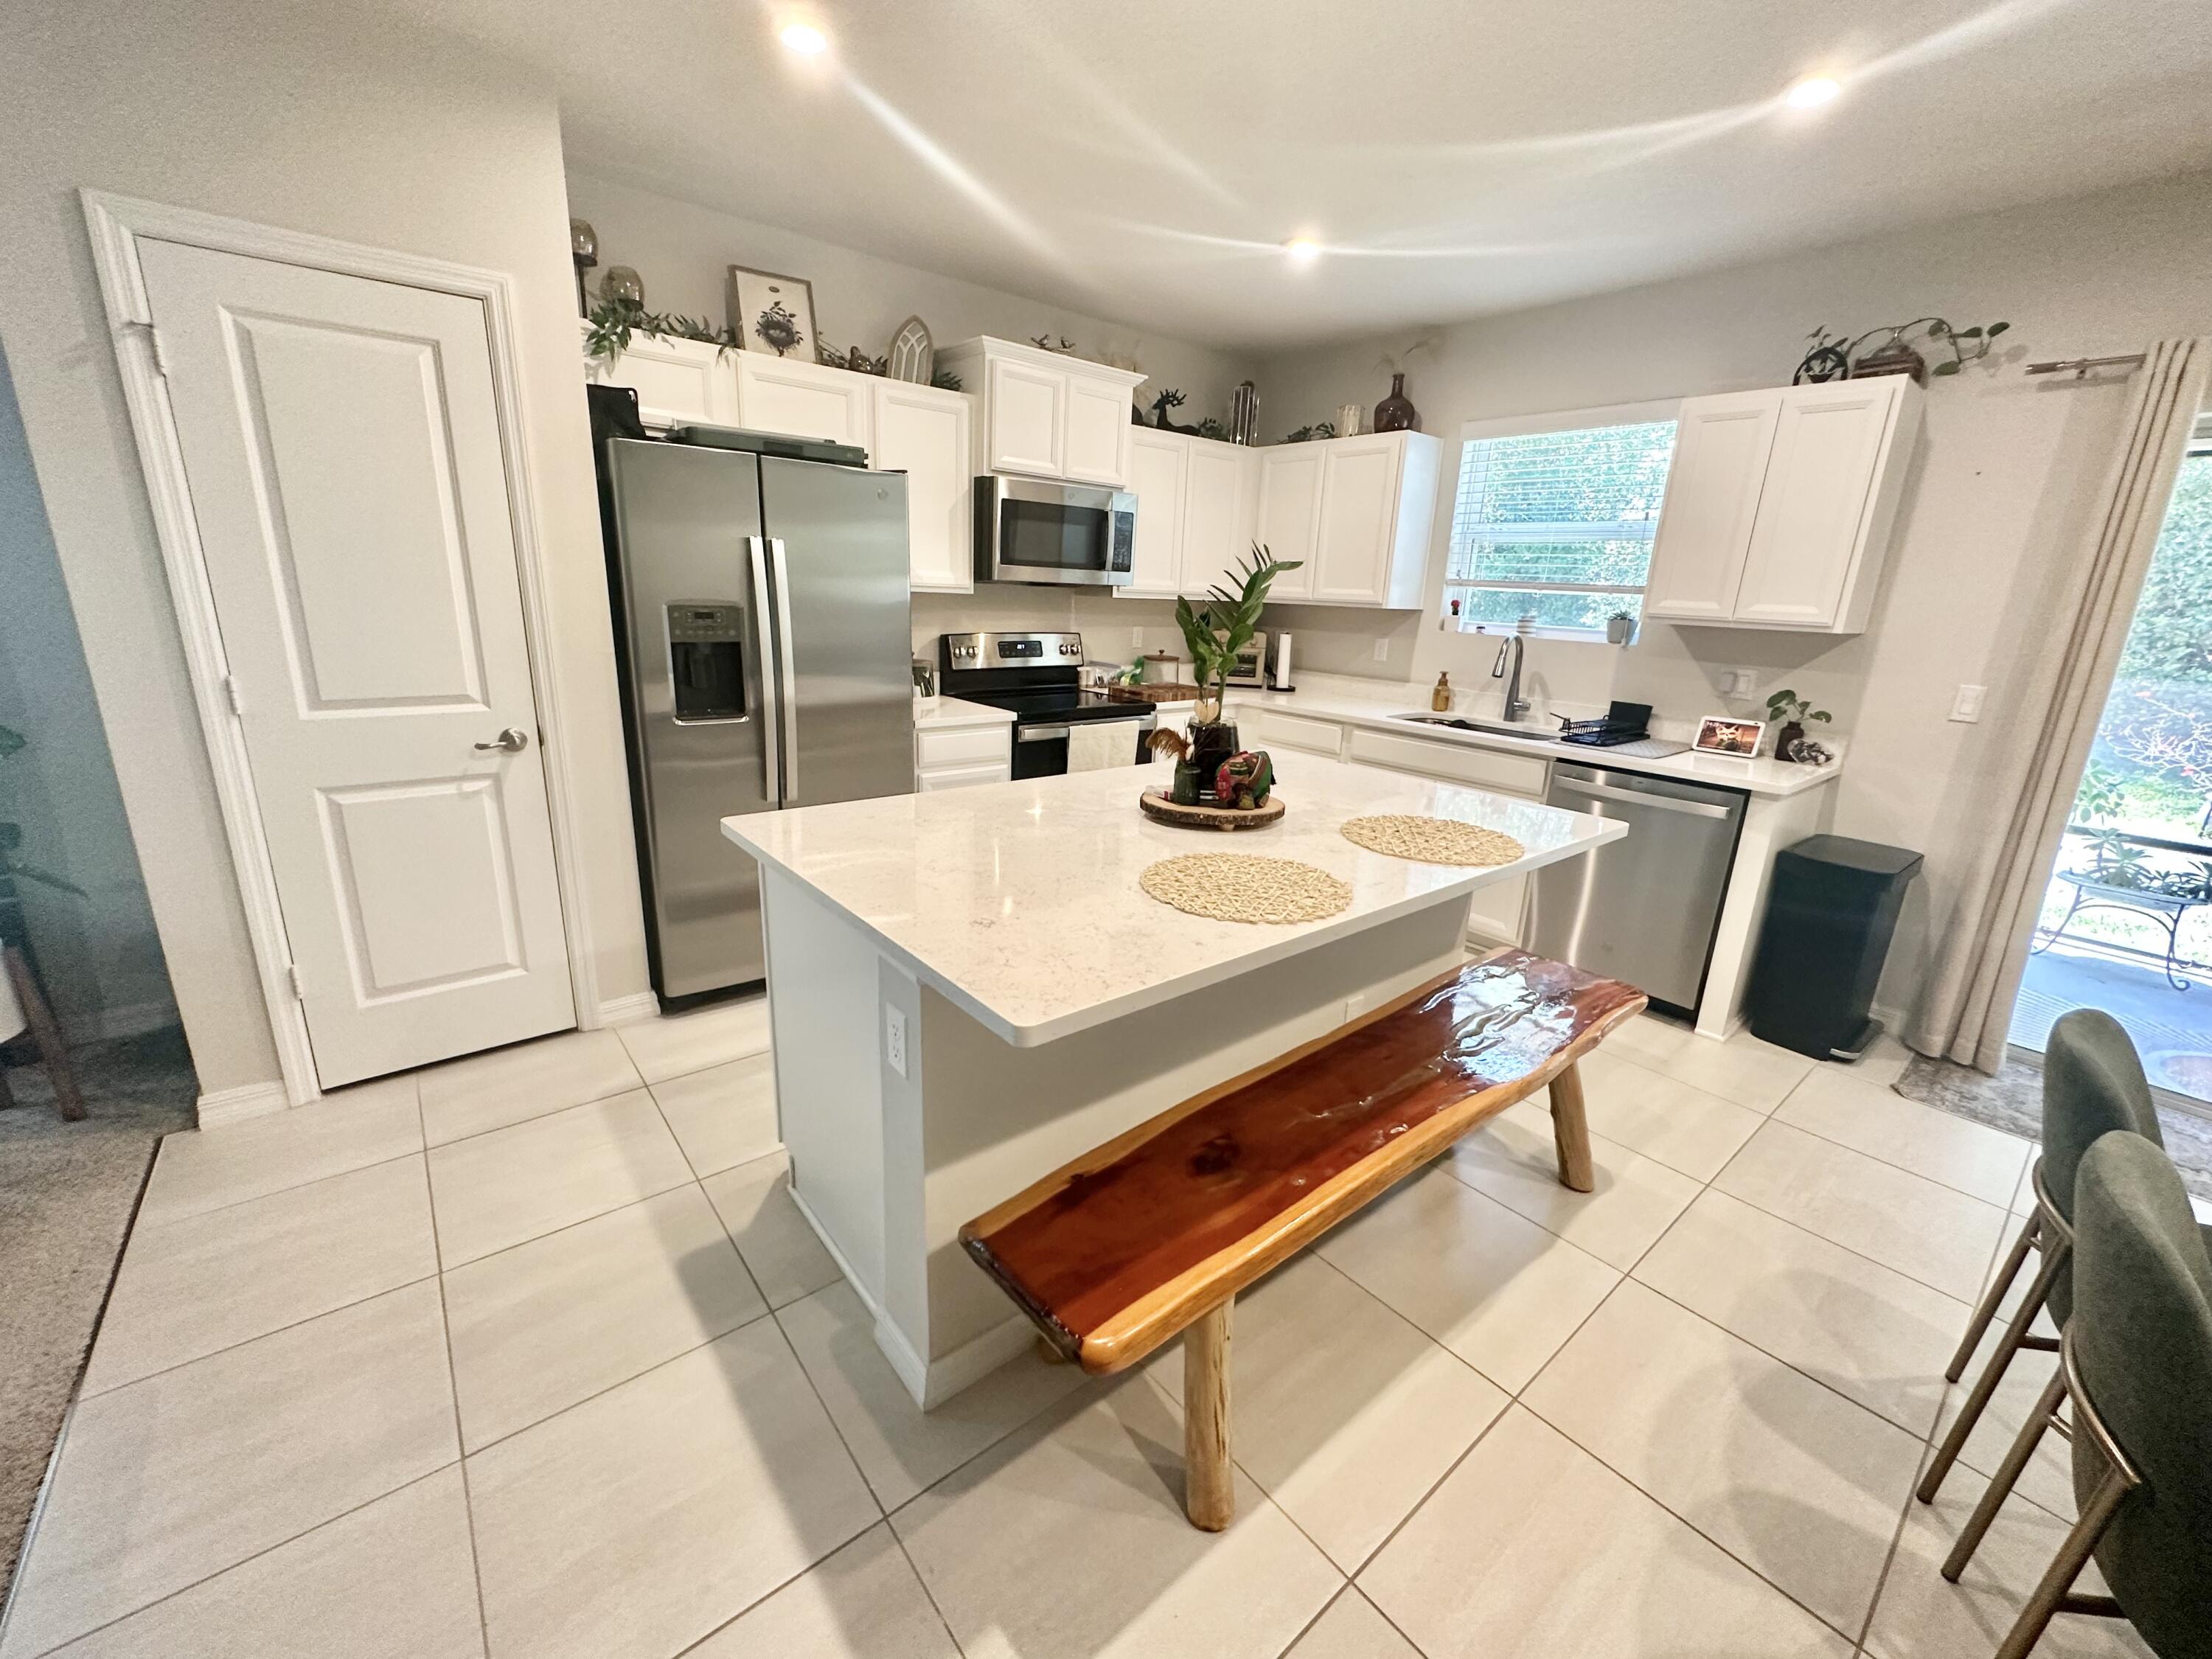 a kitchen with stainless steel appliances a refrigerator a stove a sink dishwasher and white cabinets with wooden floor